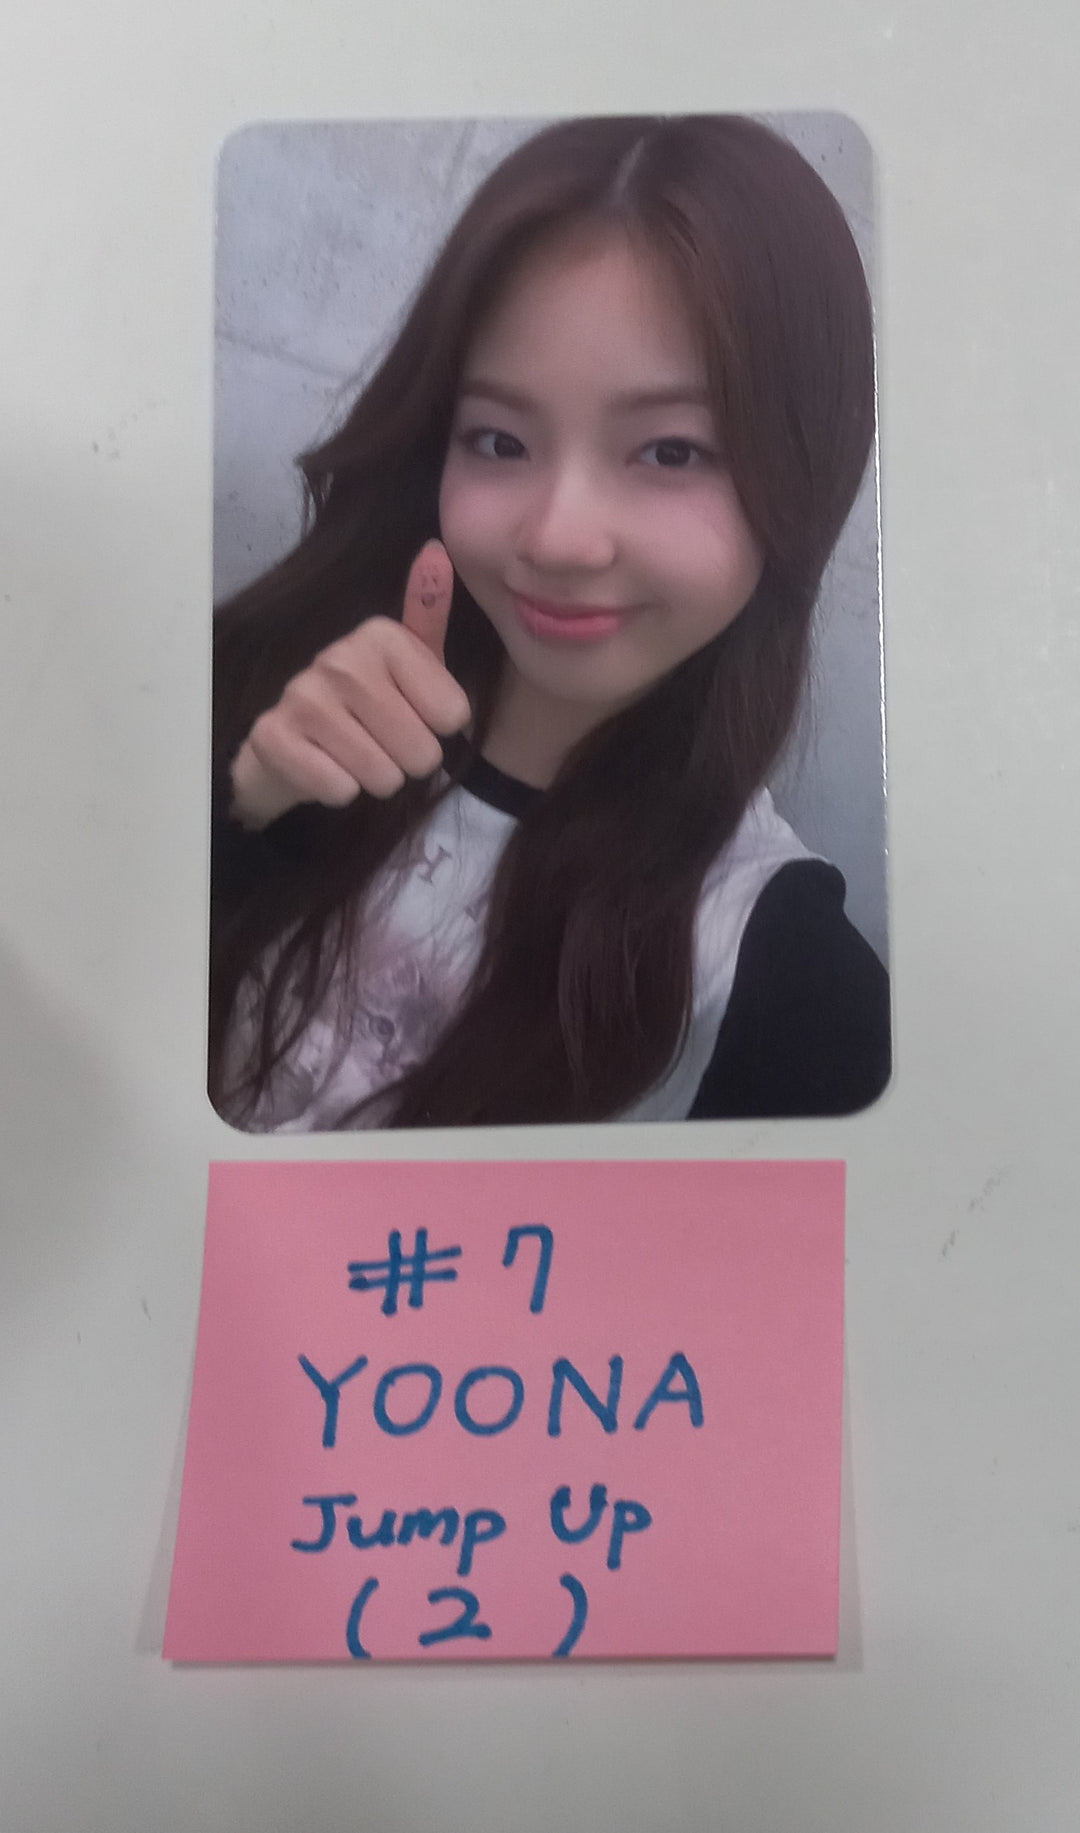 UNIS 'WE UNIS' - Jump Up Fansign Event Photocard Round 3 [24.4.30]